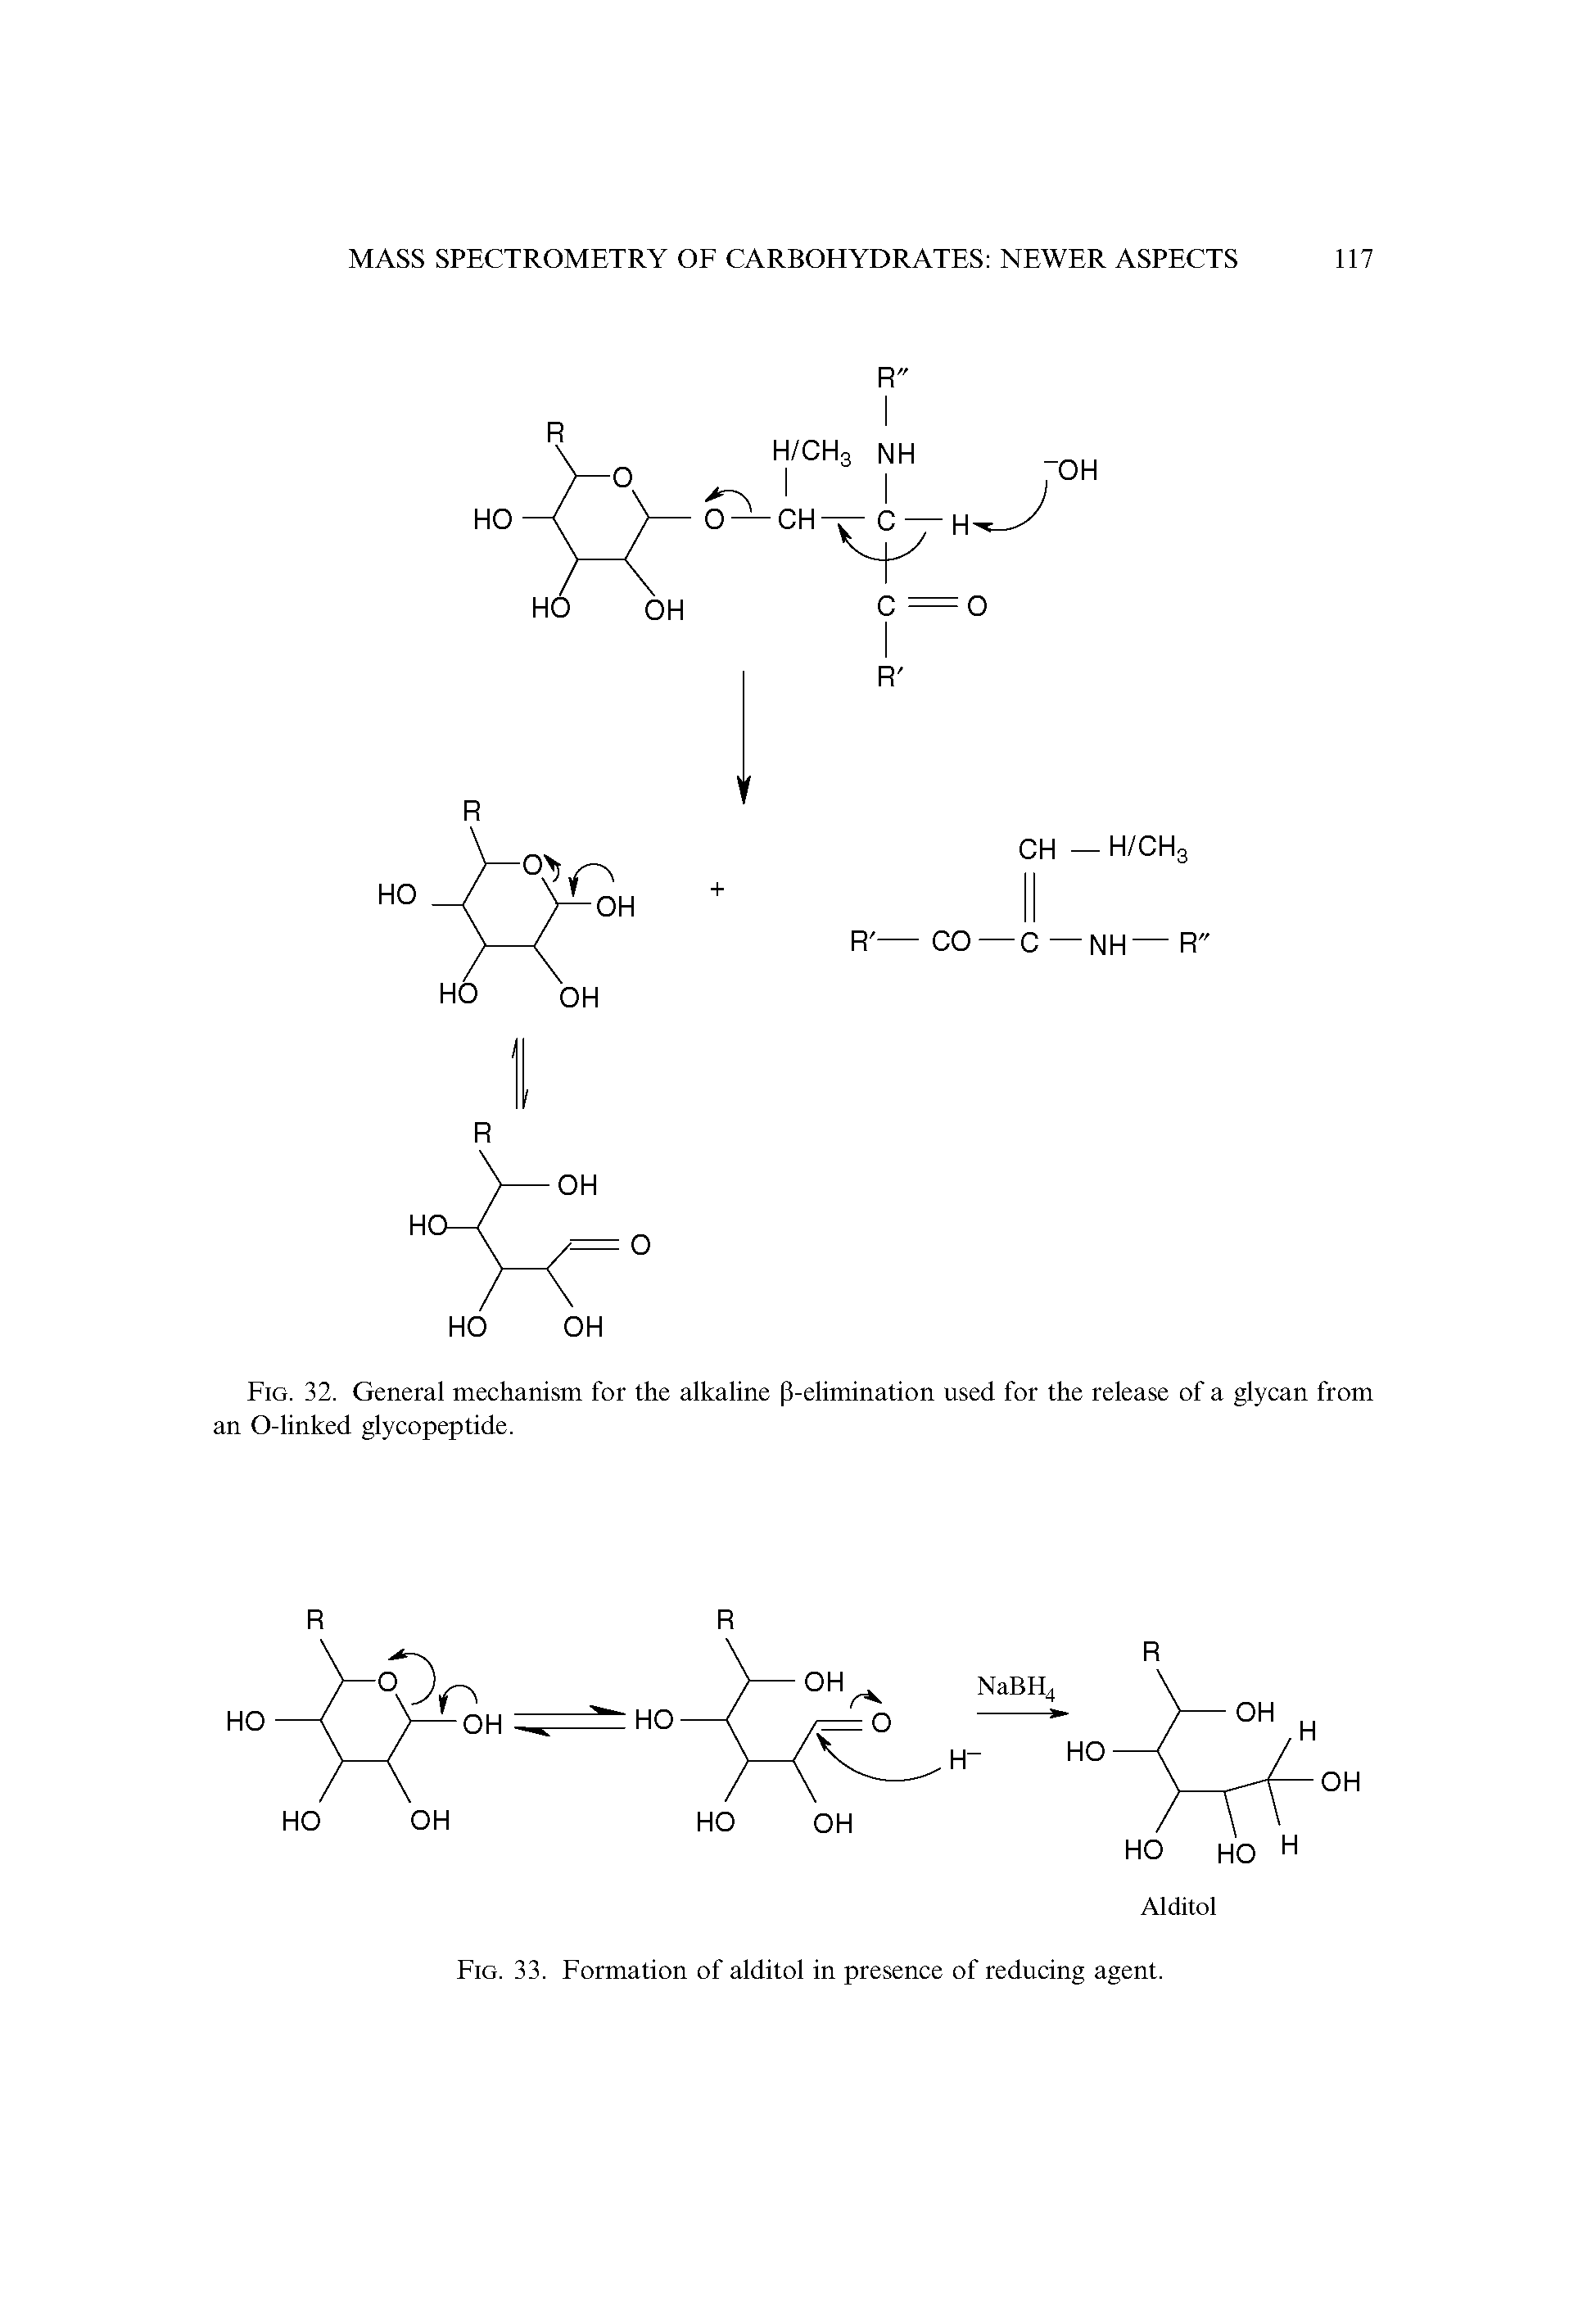 Fig. 32. General mechanism for the alkaline P-elimination used for the release of a glycan from an O-linked glycopeptide.